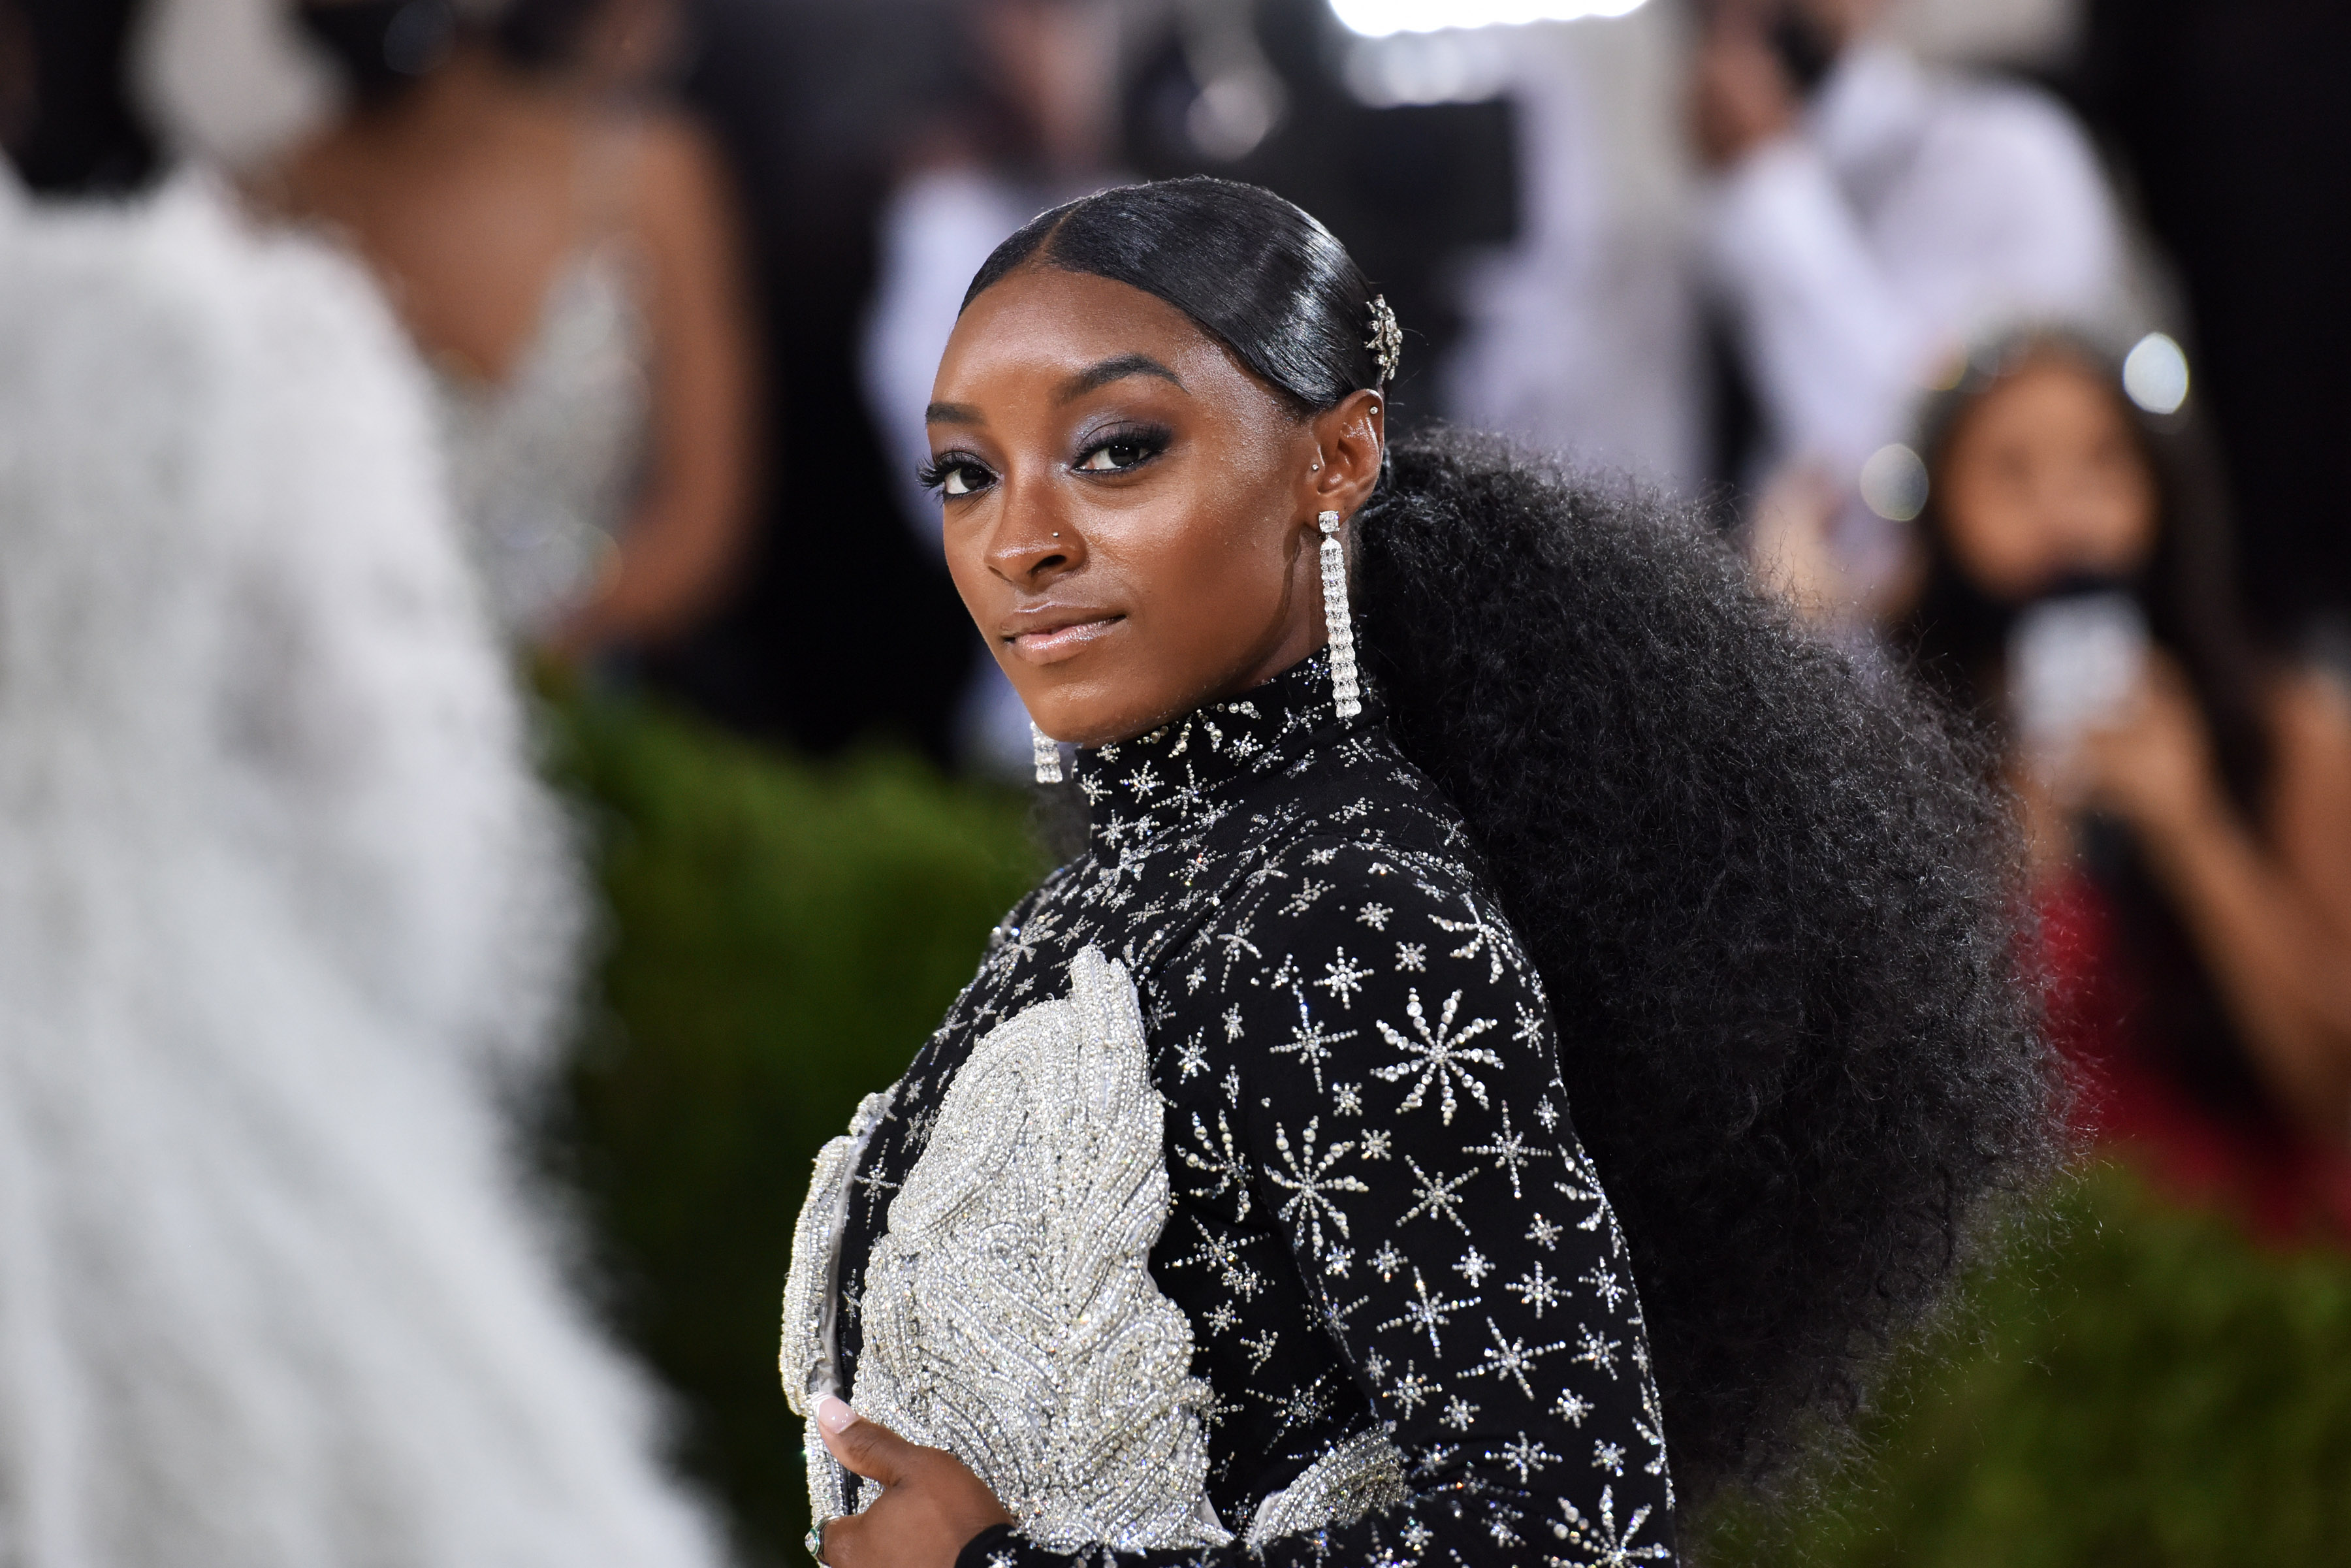 Simone Biles attends 2021 Costume Institute Benefit - In America: A Lexicon of Fashion at the Metropolitan Museum of Art on September 13, 2021 in New York City. | Source: Getty Images